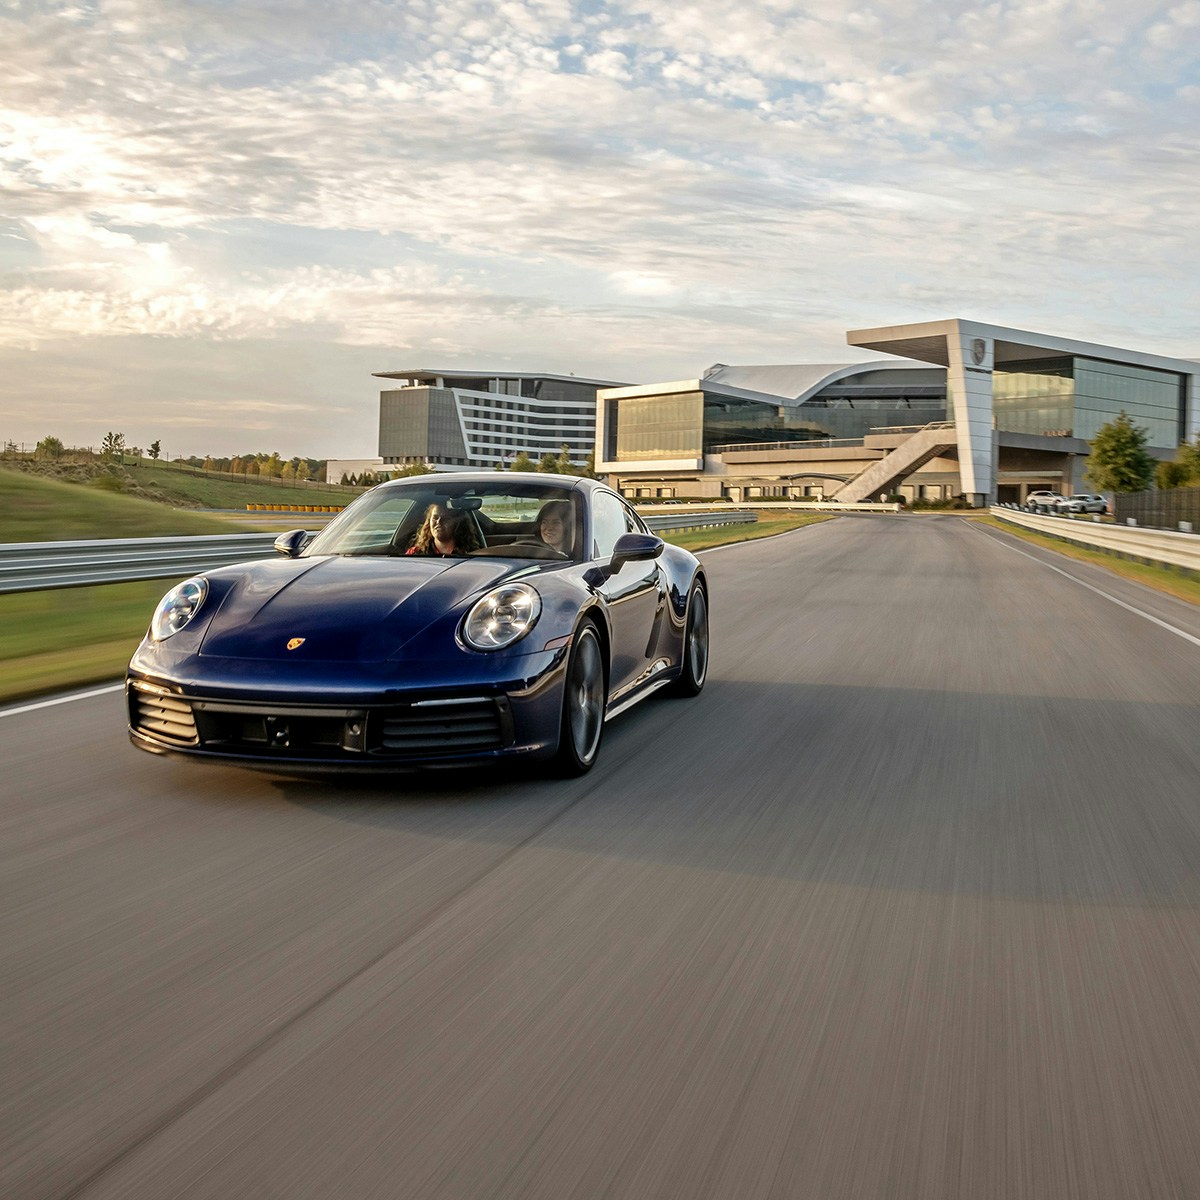 A Porsche car in movement on a track with a Porsche Experience Center building in the background.